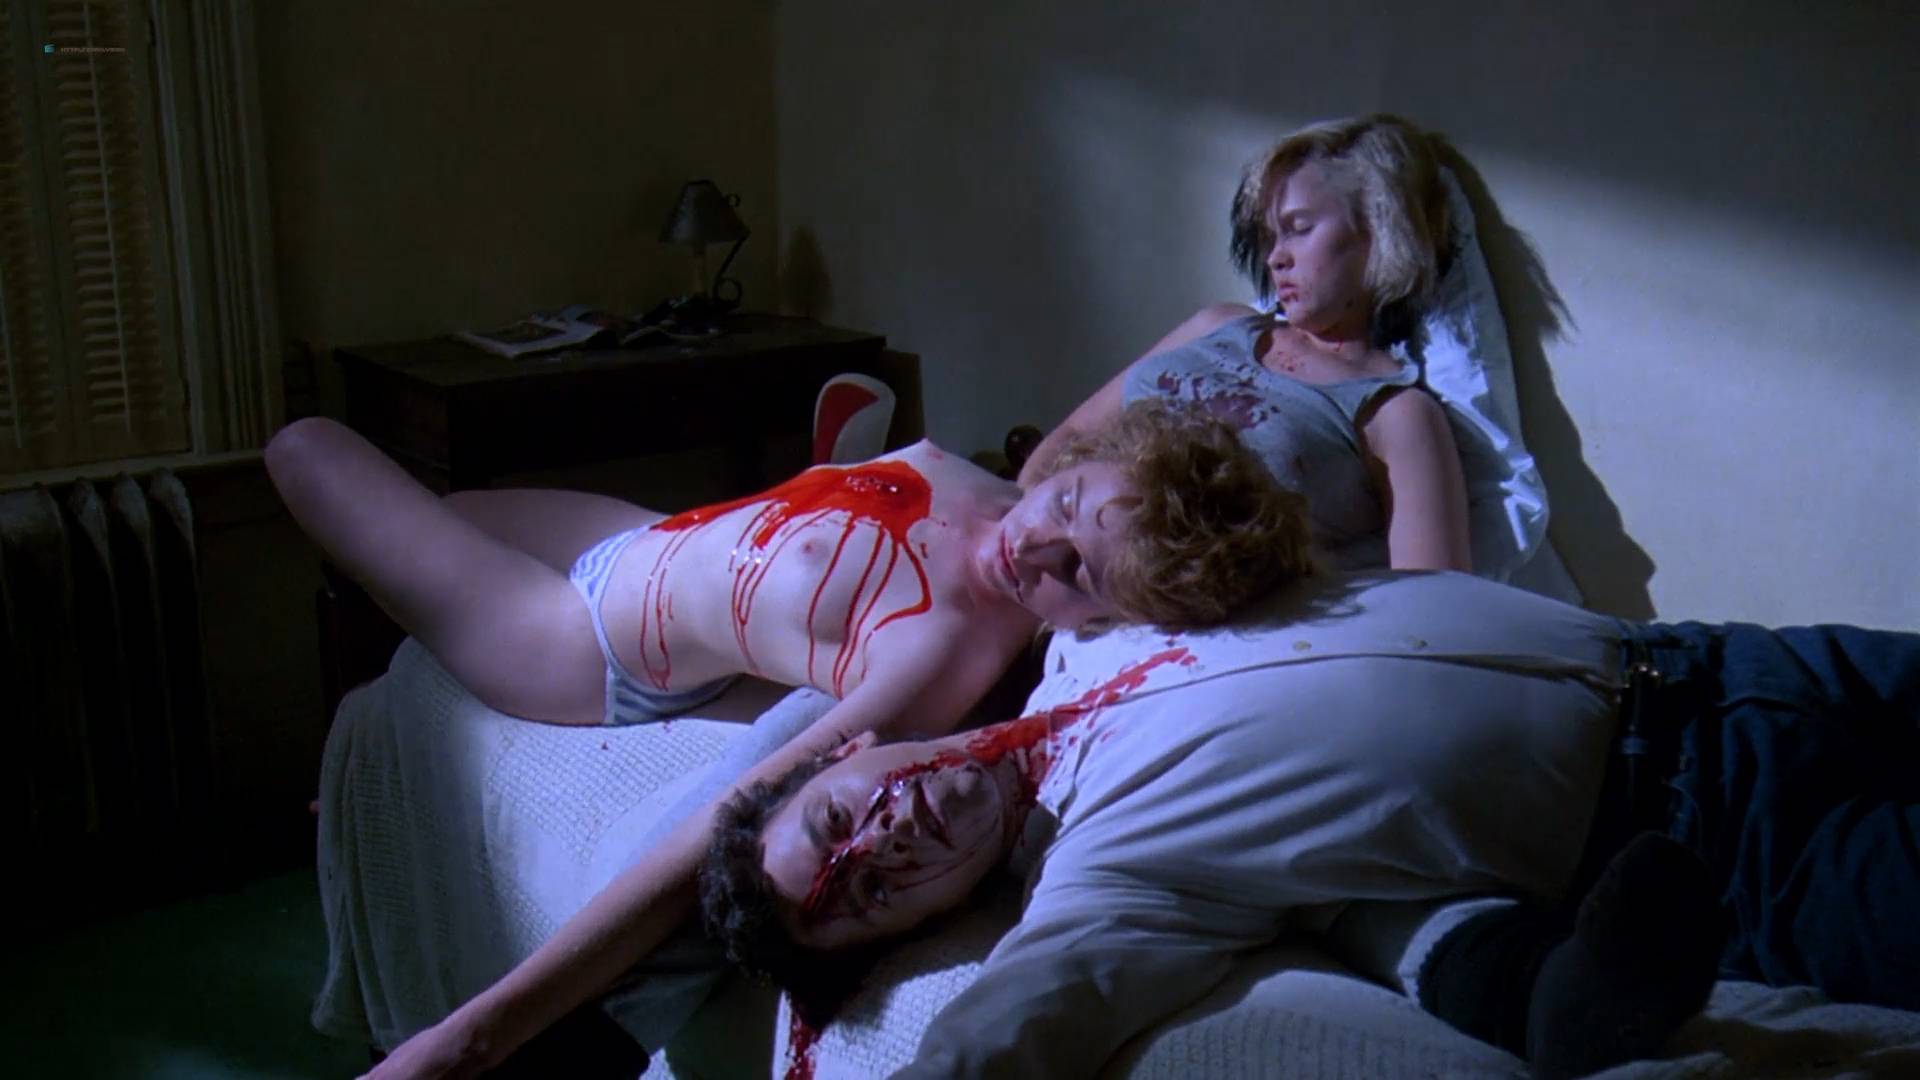 Debi Sue Voorhees Nude Sex Juliette Cummins And Rebecca Wood All Nude Friday The 13th Part V